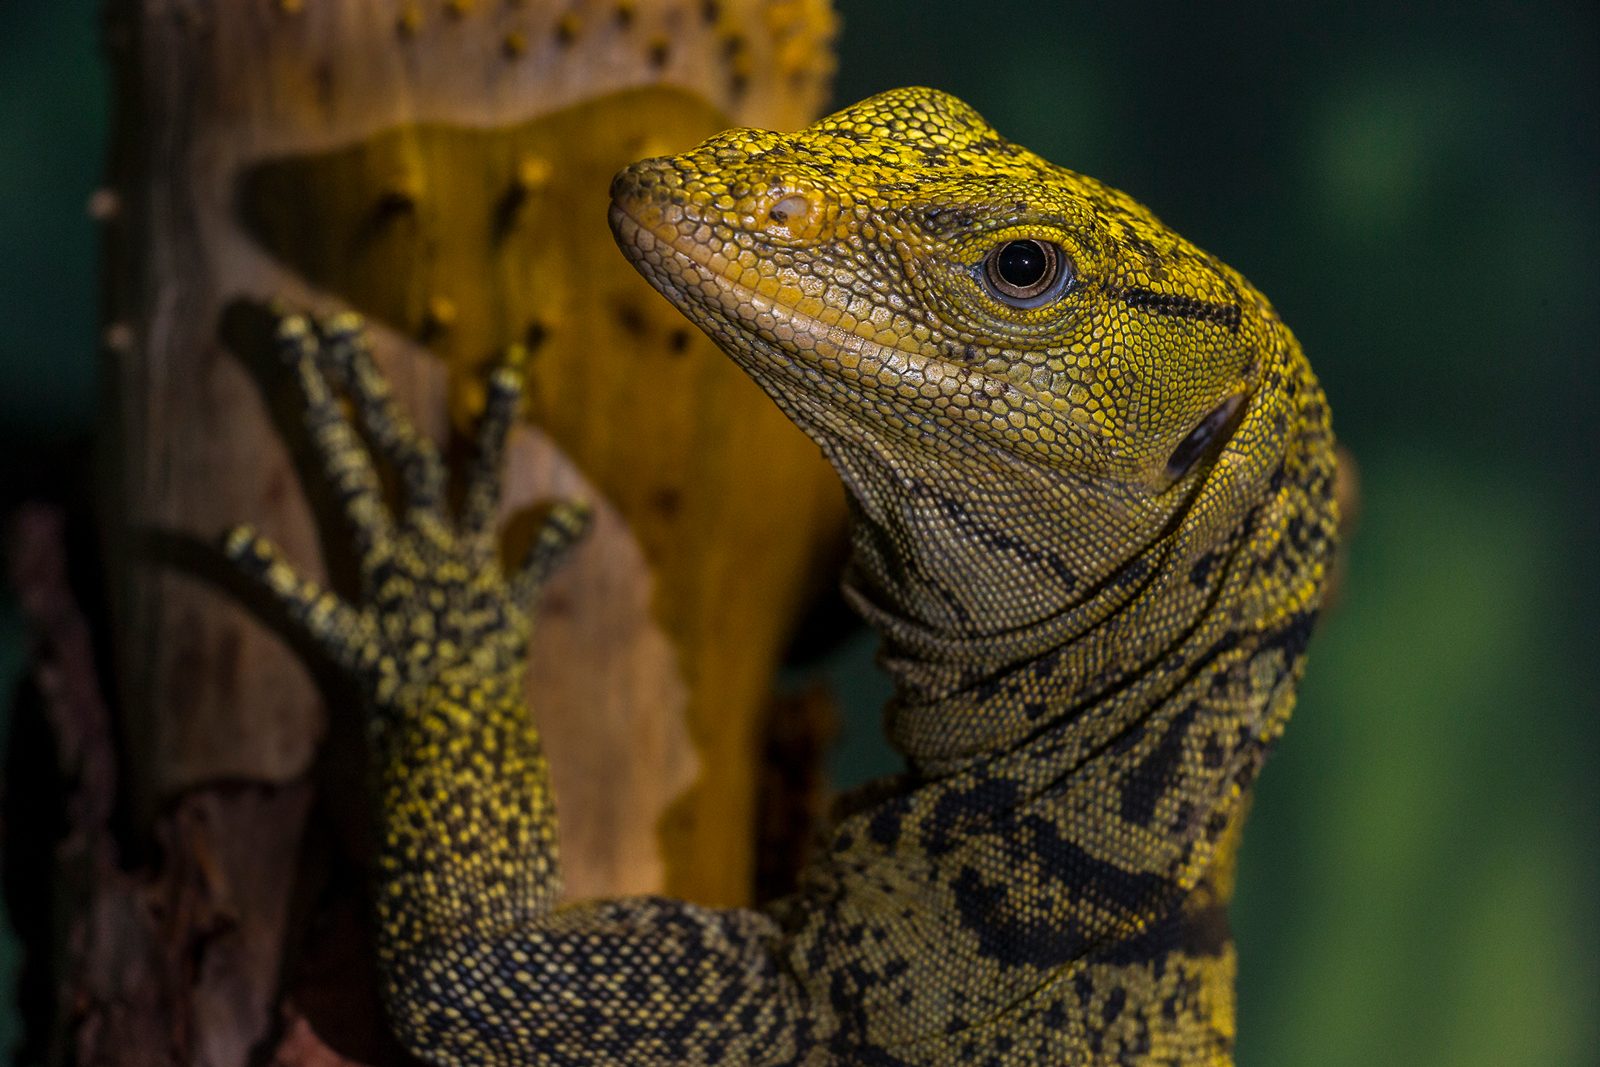 Rare Monitor Lizard Now on Exhibit at the San Diego Zoo